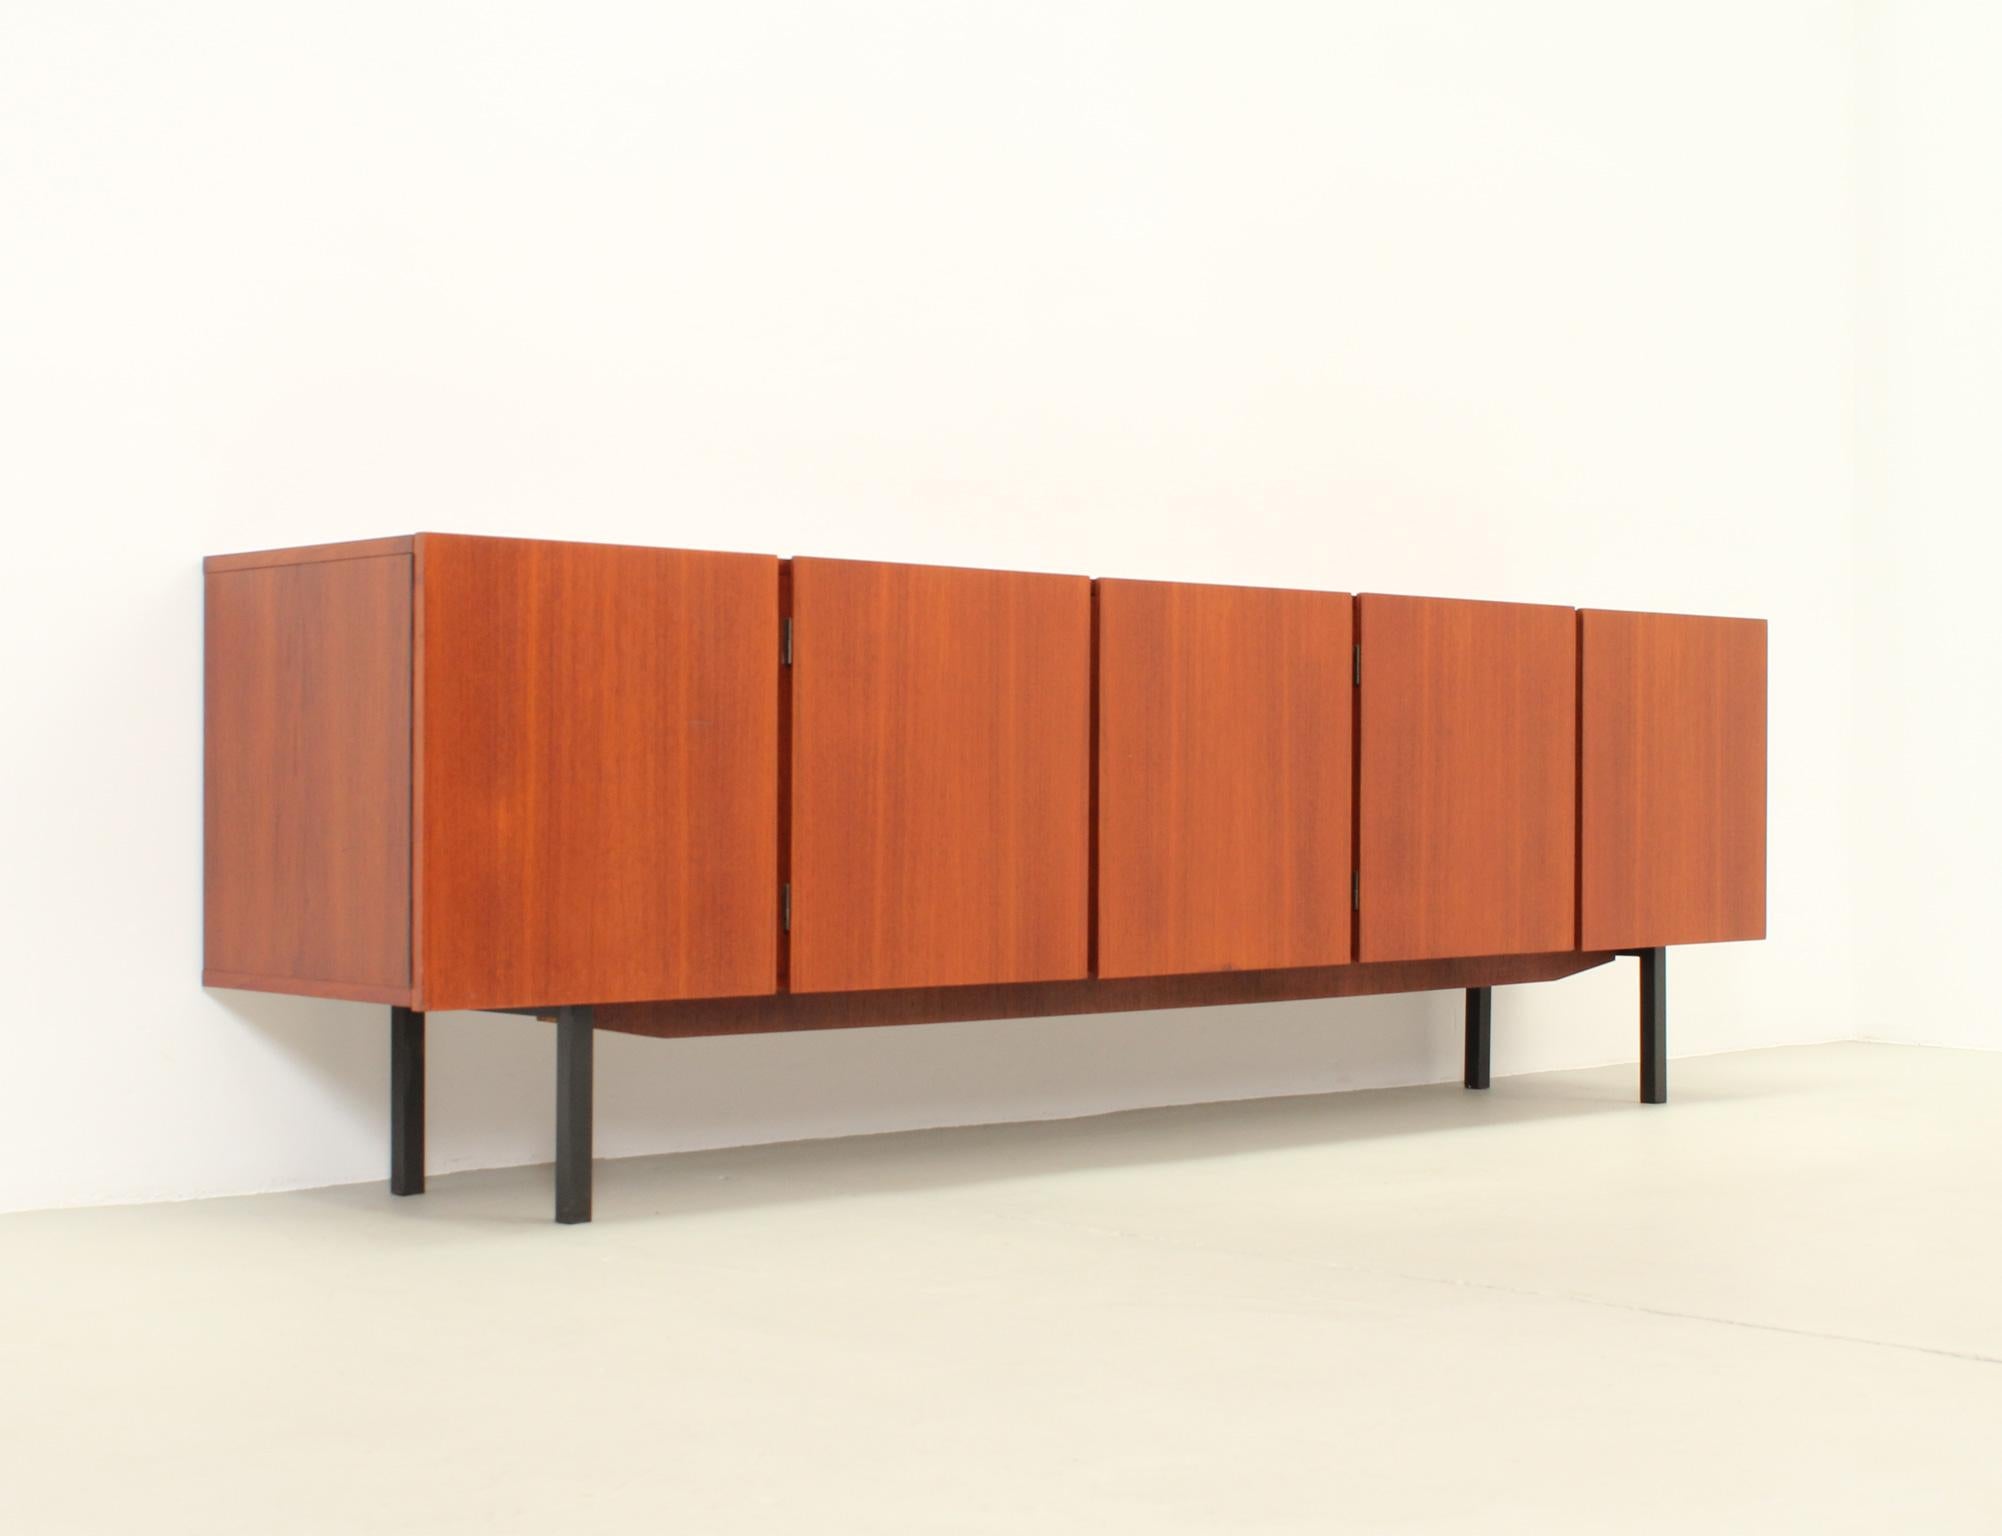 Large sideboard in teak wood from 1960's, Germany. Teak and maple wood with black metal base. Five doors, one with two drawers and an open space and the others with double storage spaces with shelves.